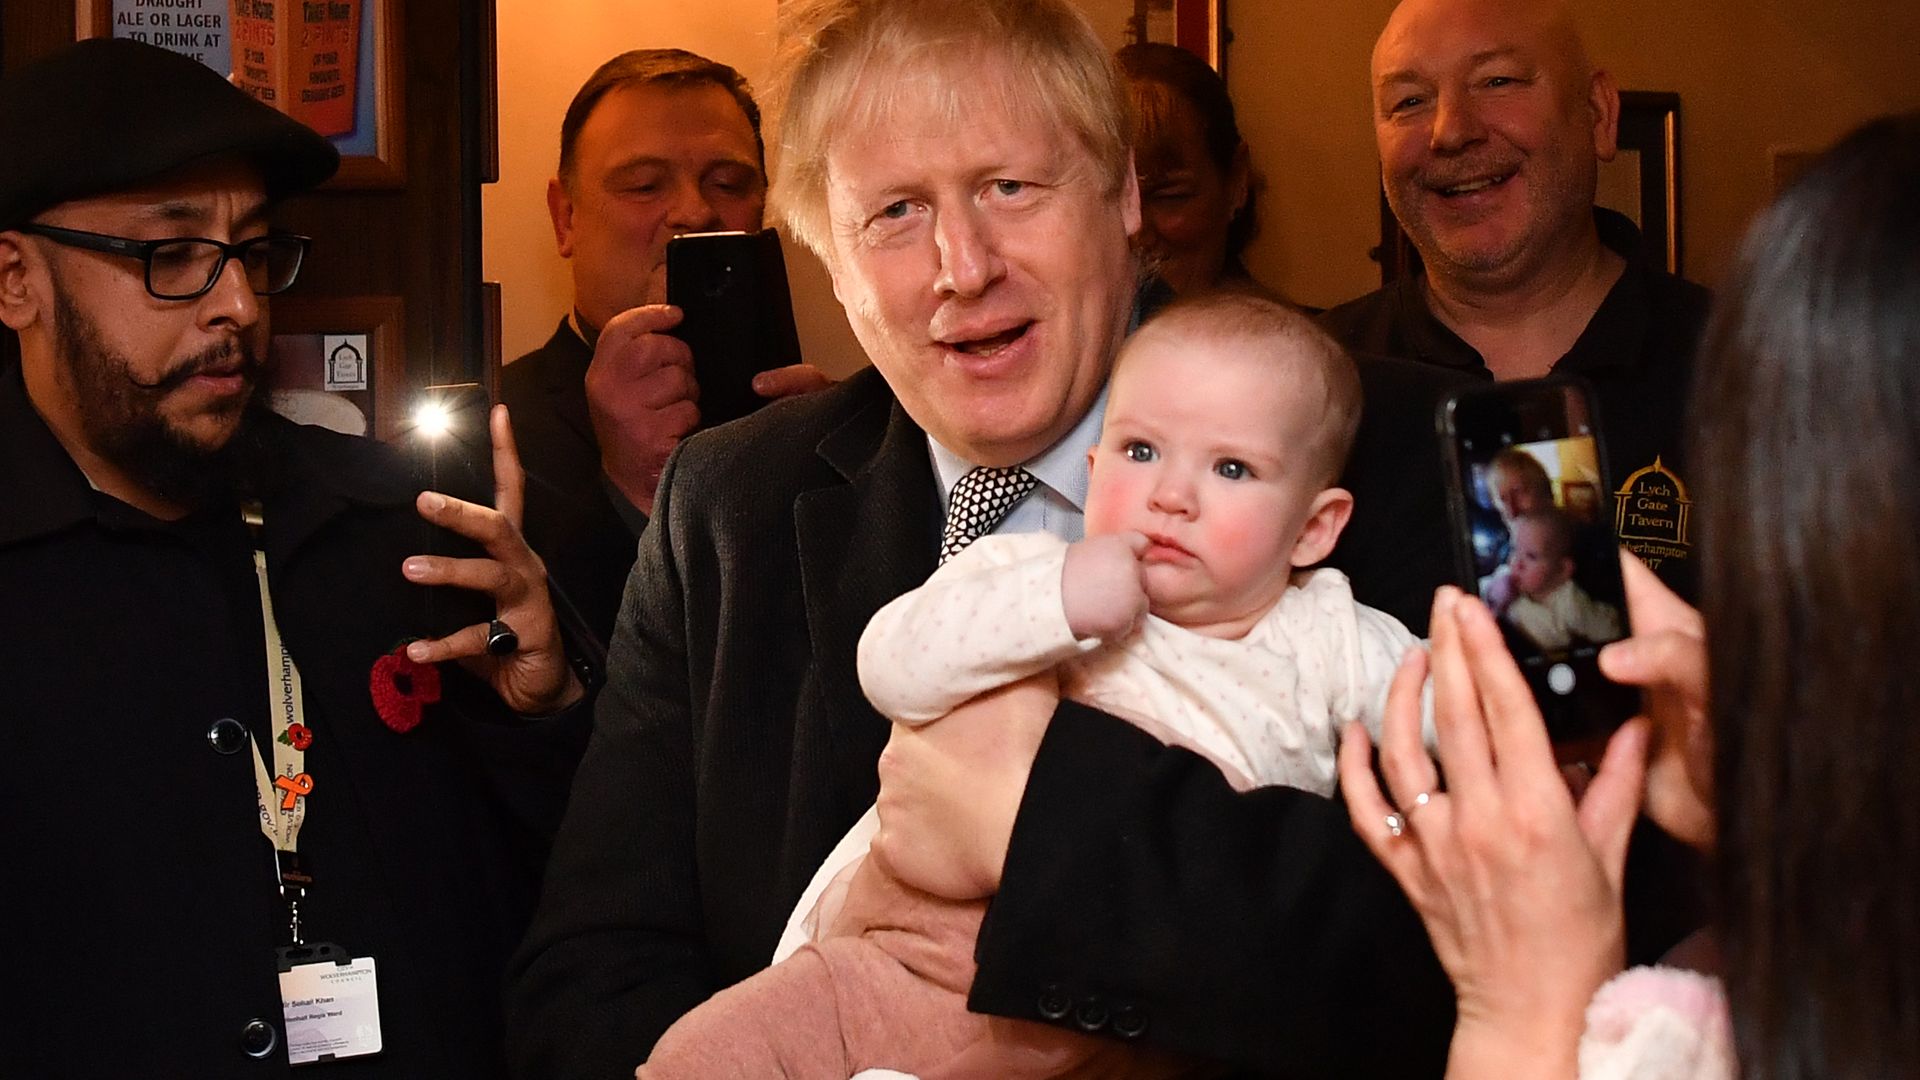 Boris Johnson holds a baby as he meets supporters as he campaigns ahead of the general election - Credit: Ben Stansall/WPA Pool/Getty Images